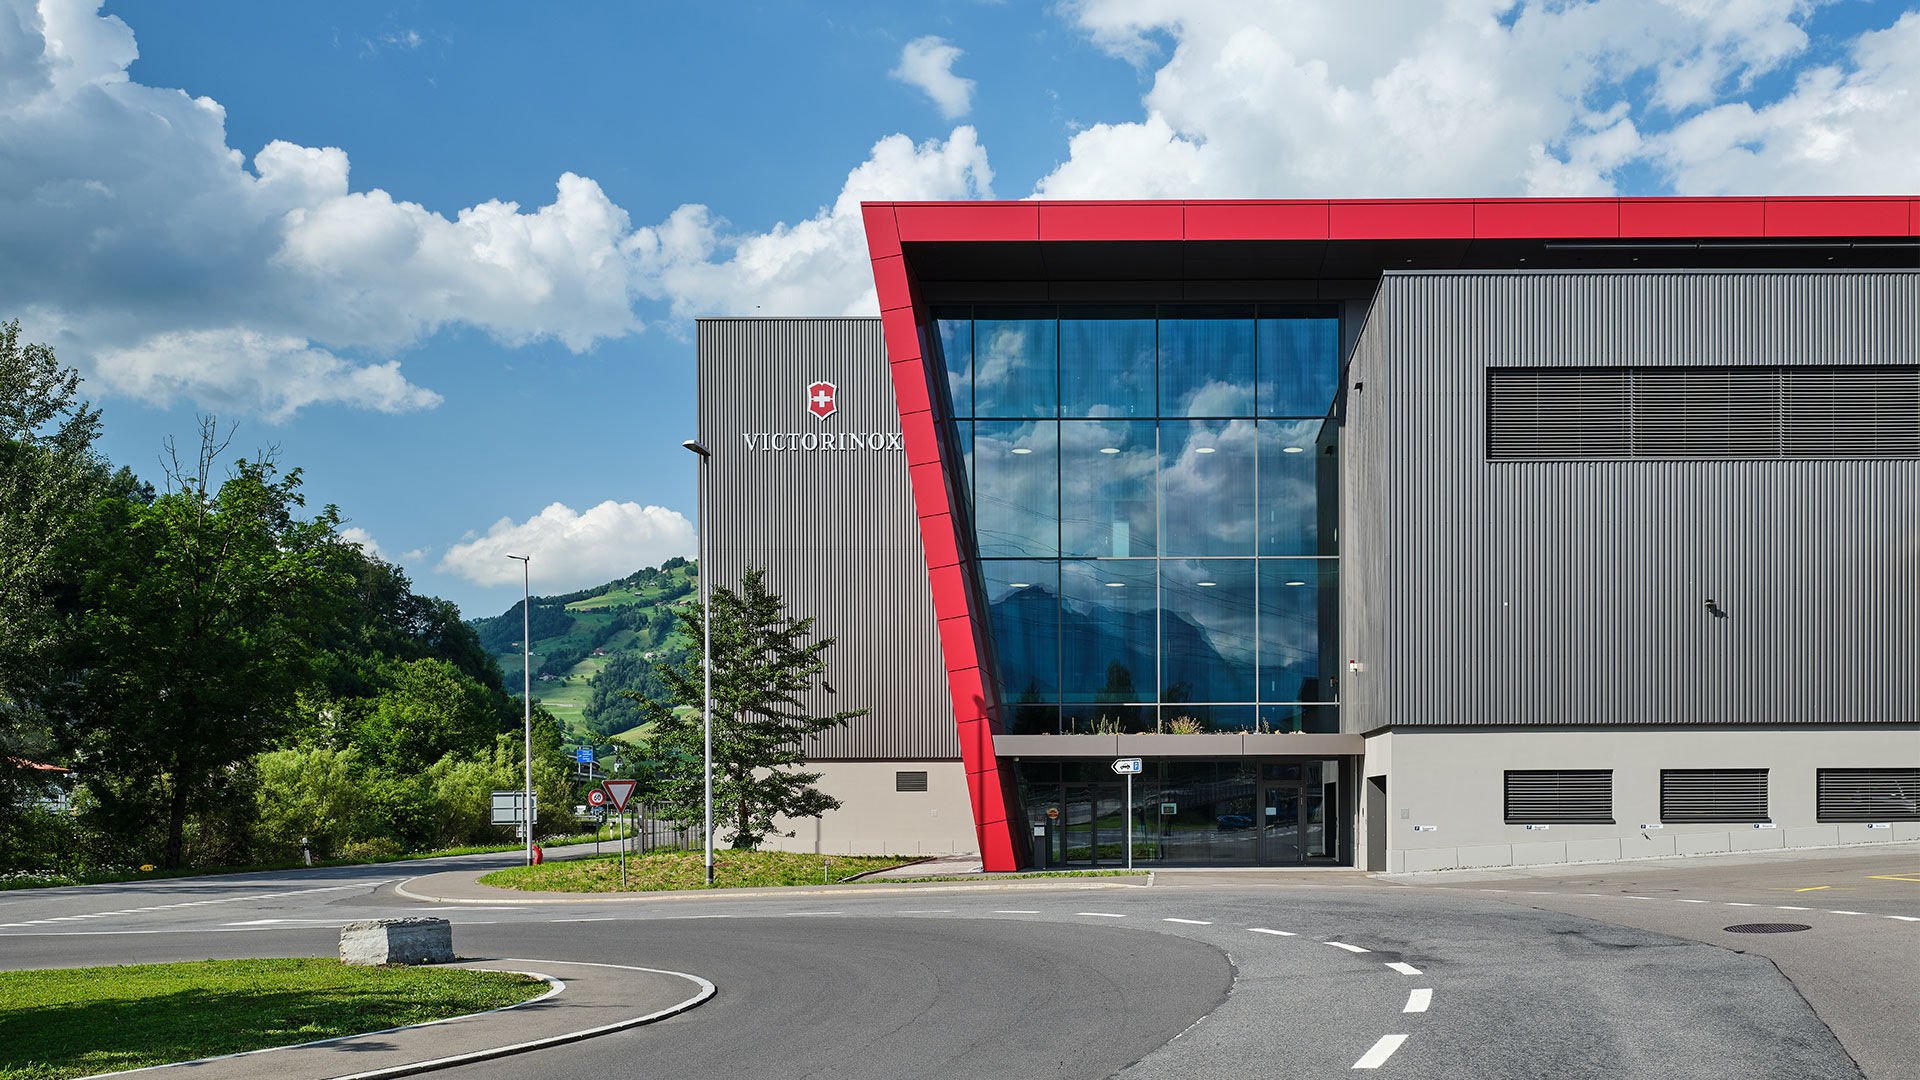 Depiction of the Victorinox warehouse from the outside.